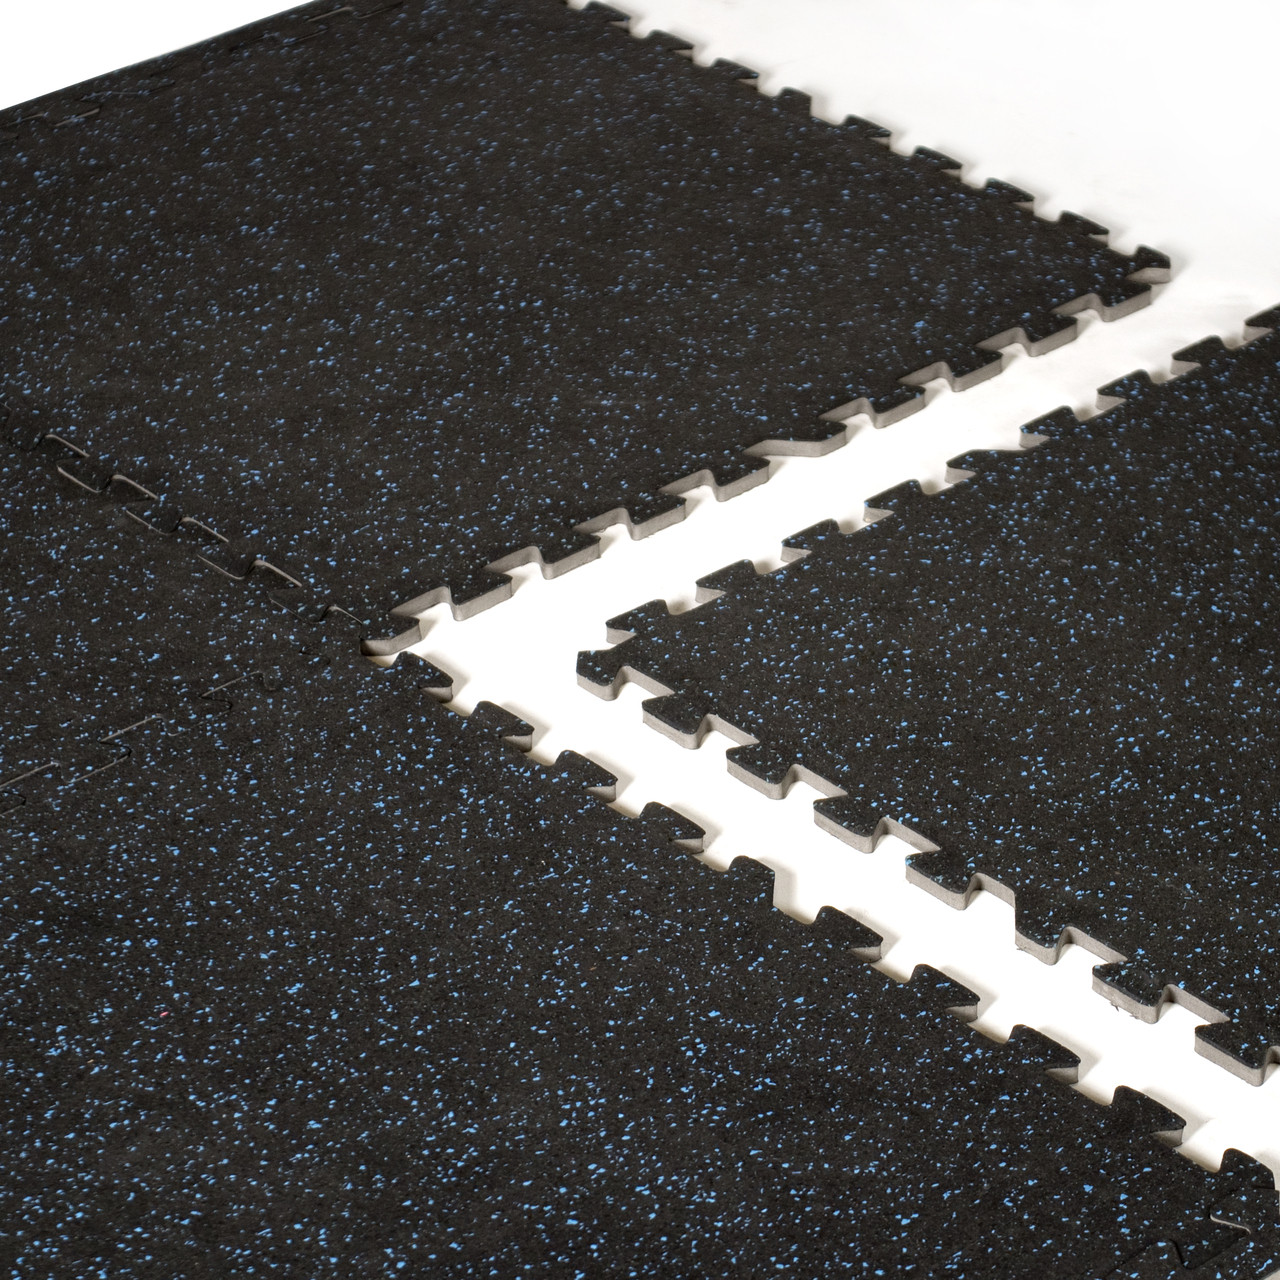 Start with Recycled Rubber Mats